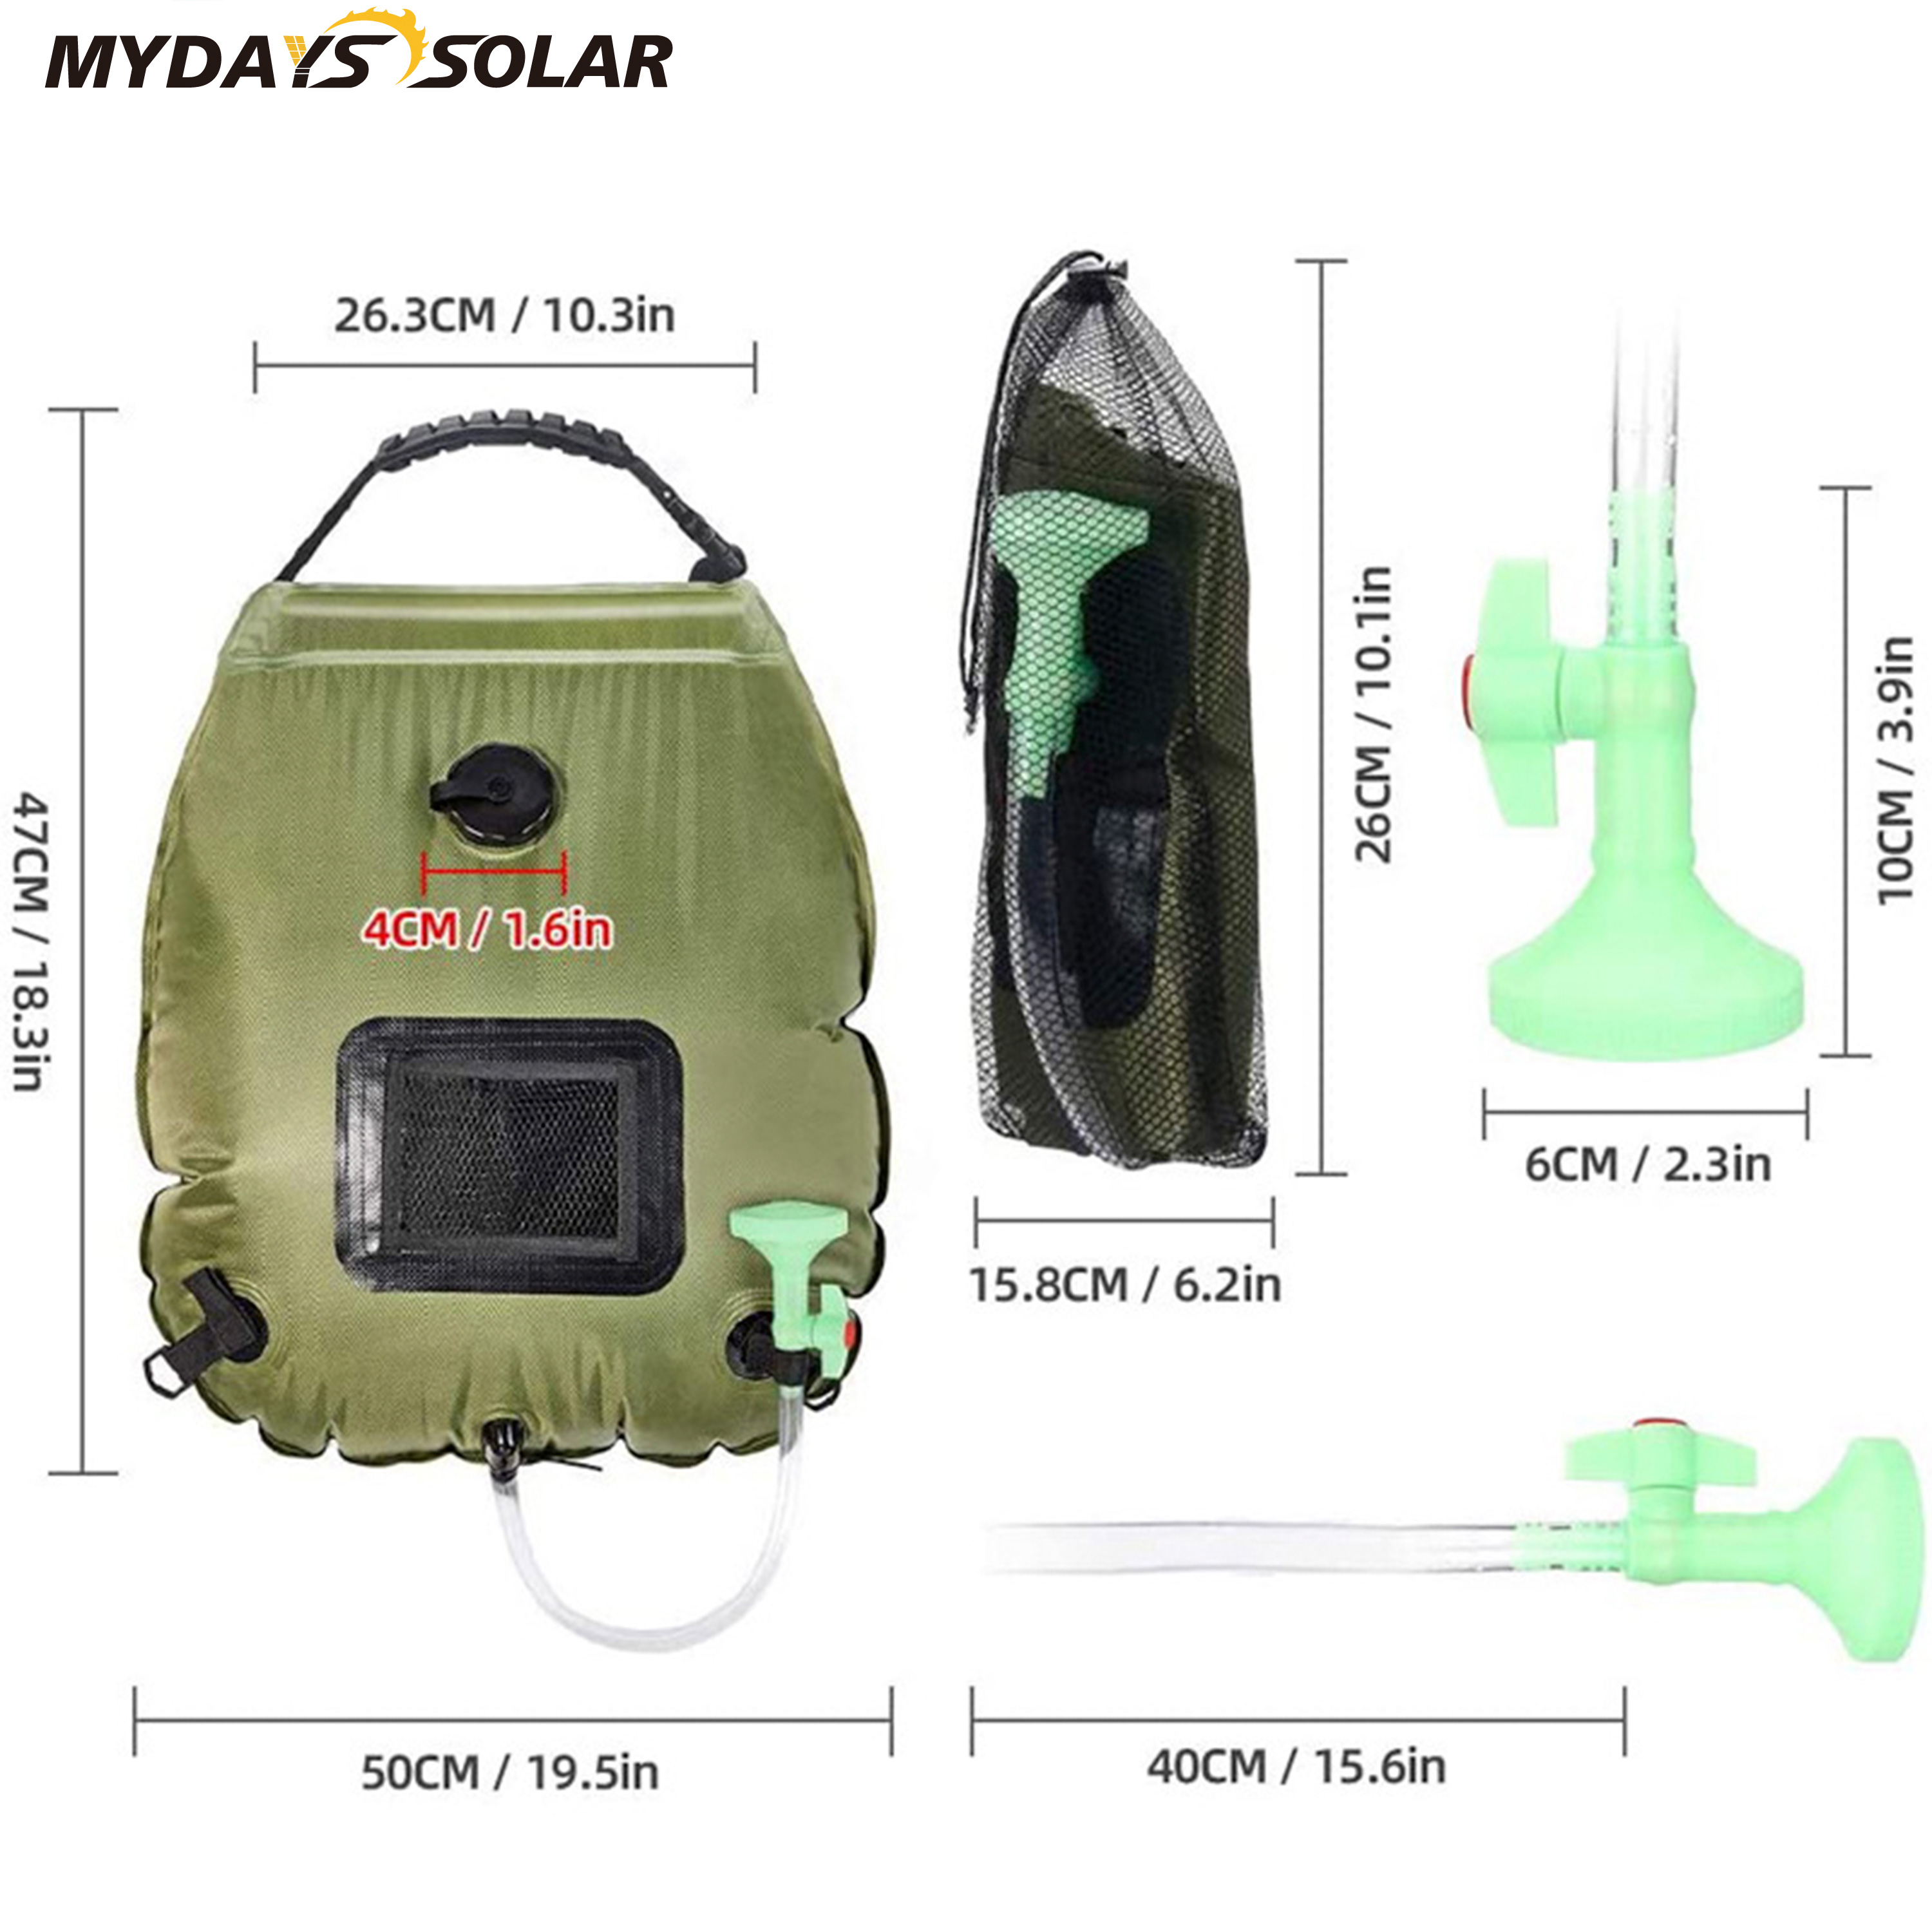 20L Solar Heating PVC Waterproof Removable Hose On Off Switchable Head Shower Bag MDSW-1007